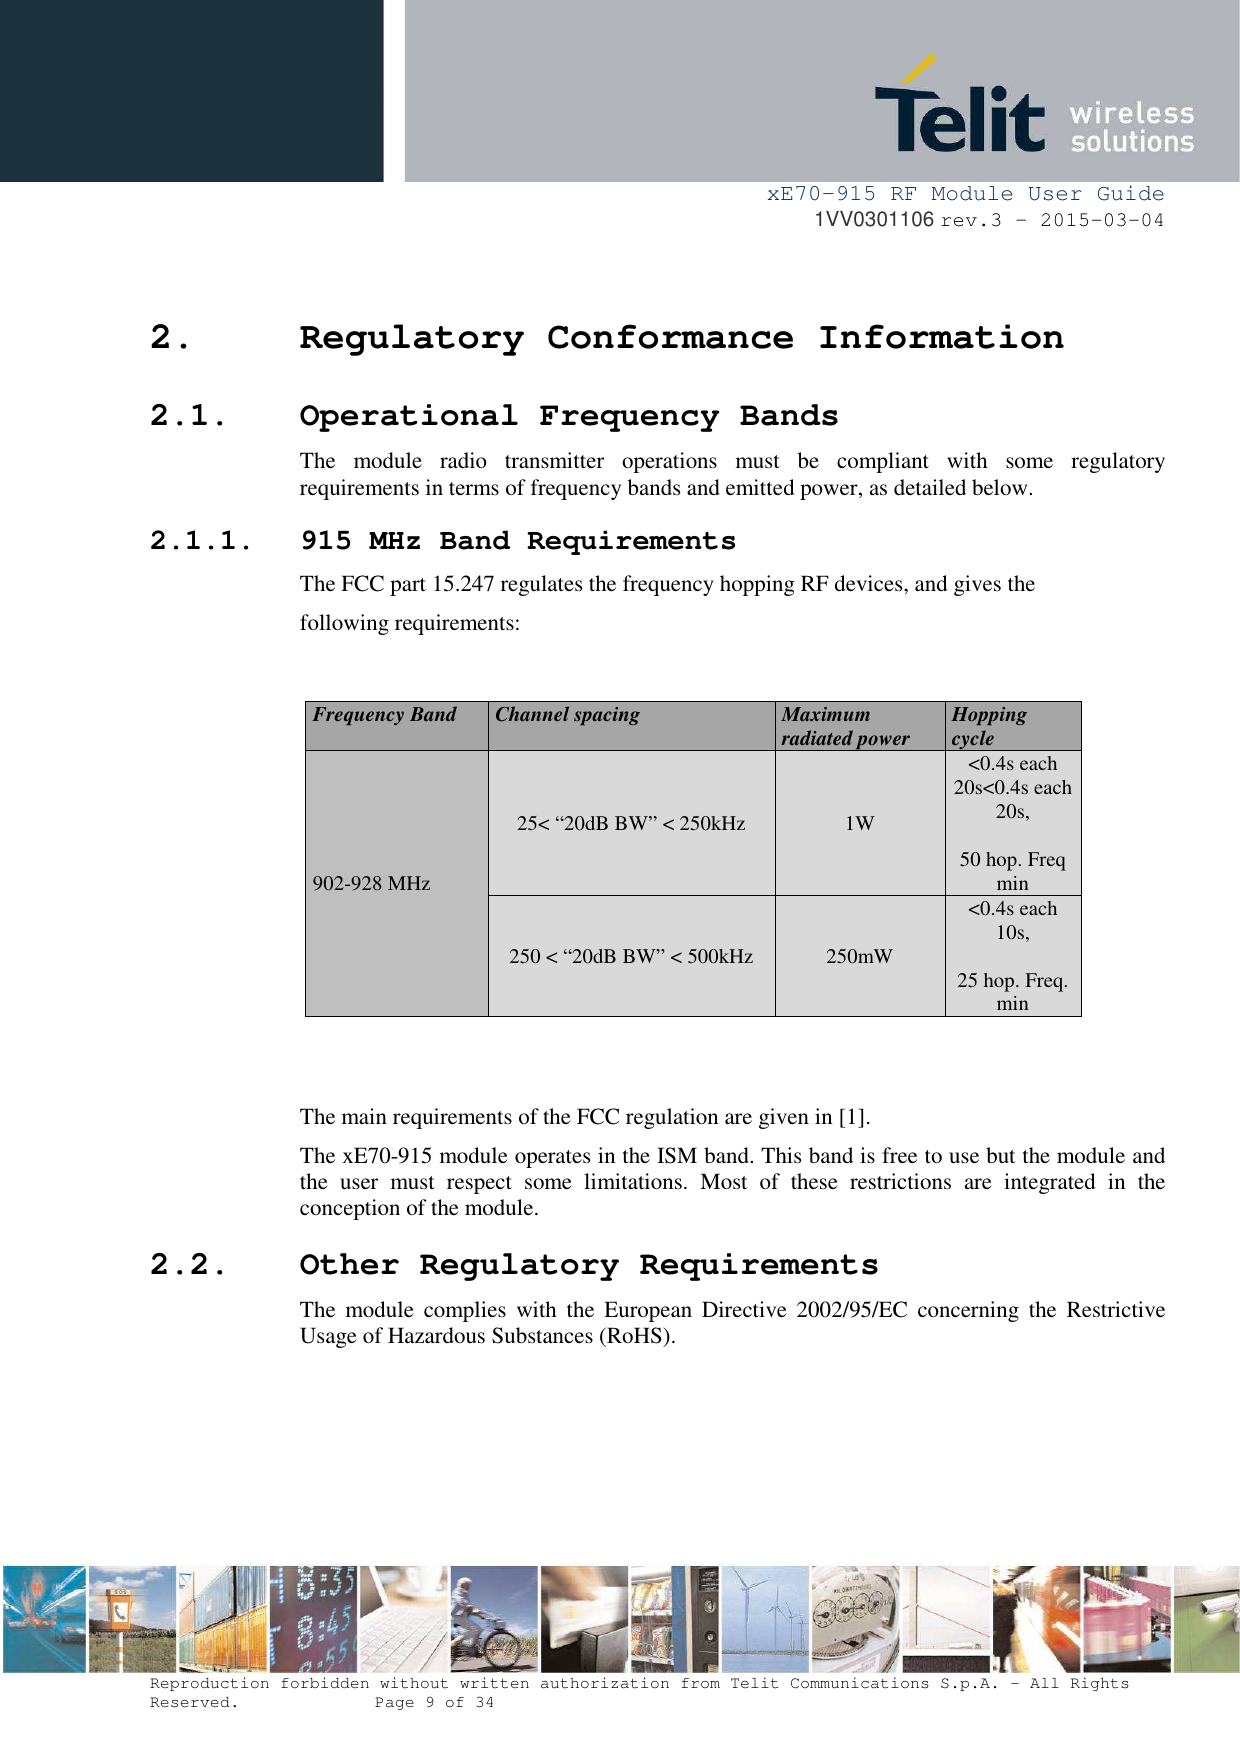     xE70-915 RF Module User Guide 1VV0301106 rev.3 – 2015-03-04  Reproduction forbidden without written authorization from Telit Communications S.p.A. - All Rights Reserved.    Page 9 of 34  2. Regulatory Conformance Information 2.1. Operational Frequency Bands The  module  radio  transmitter  operations  must  be  compliant  with  some  regulatory requirements in terms of frequency bands and emitted power, as detailed below. 2.1.1. 915 MHz Band Requirements The FCC part 15.247 regulates the frequency hopping RF devices, and gives the following requirements:   Frequency Band  Channel spacing  Maximum radiated power  Hopping cycle 902-928 MHz 25&lt; “20dB BW” &lt; 250kHz  1W &lt;0.4s each 20s&lt;0.4s each 20s,  50 hop. Freq min 250 &lt; “20dB BW” &lt; 500kHz  250mW &lt;0.4s each 10s,  25 hop. Freq. min   The main requirements of the FCC regulation are given in [1].  The xE70-915 module operates in the ISM band. This band is free to use but the module and the  user  must  respect  some  limitations.  Most  of  these  restrictions  are  integrated  in  the conception of the module. 2.2. Other Regulatory Requirements The  module  complies  with  the  European  Directive  2002/95/EC  concerning  the  Restrictive Usage of Hazardous Substances (RoHS).   